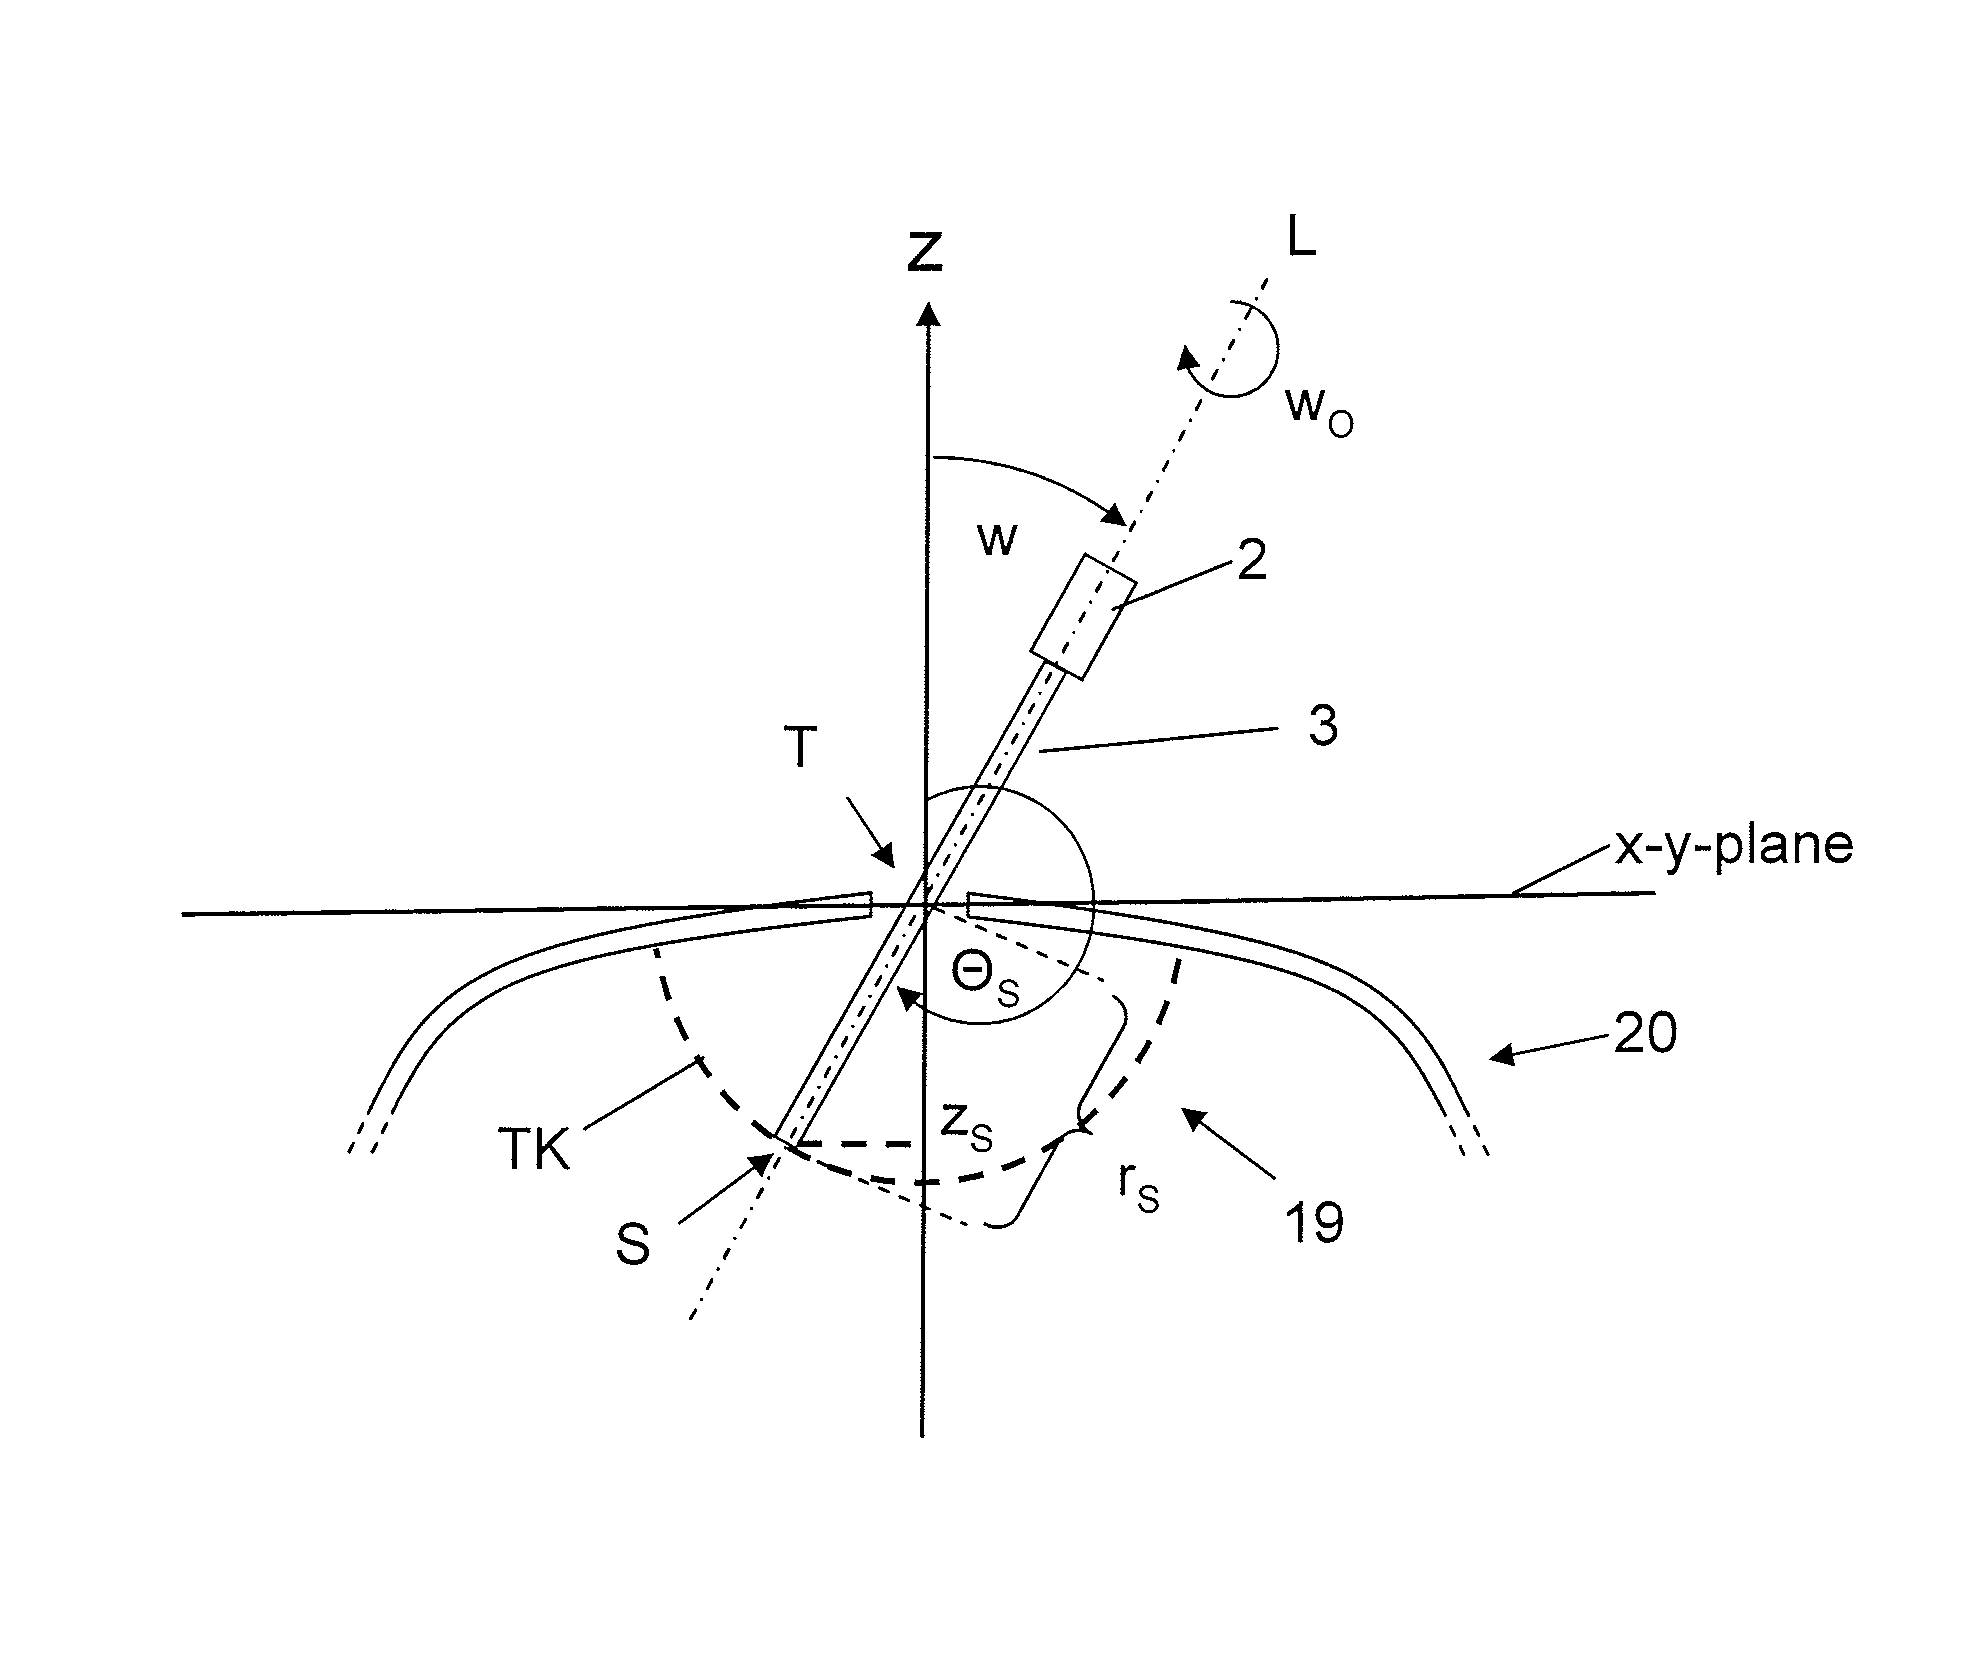 Surgery assistance system for guiding a surgical instrument